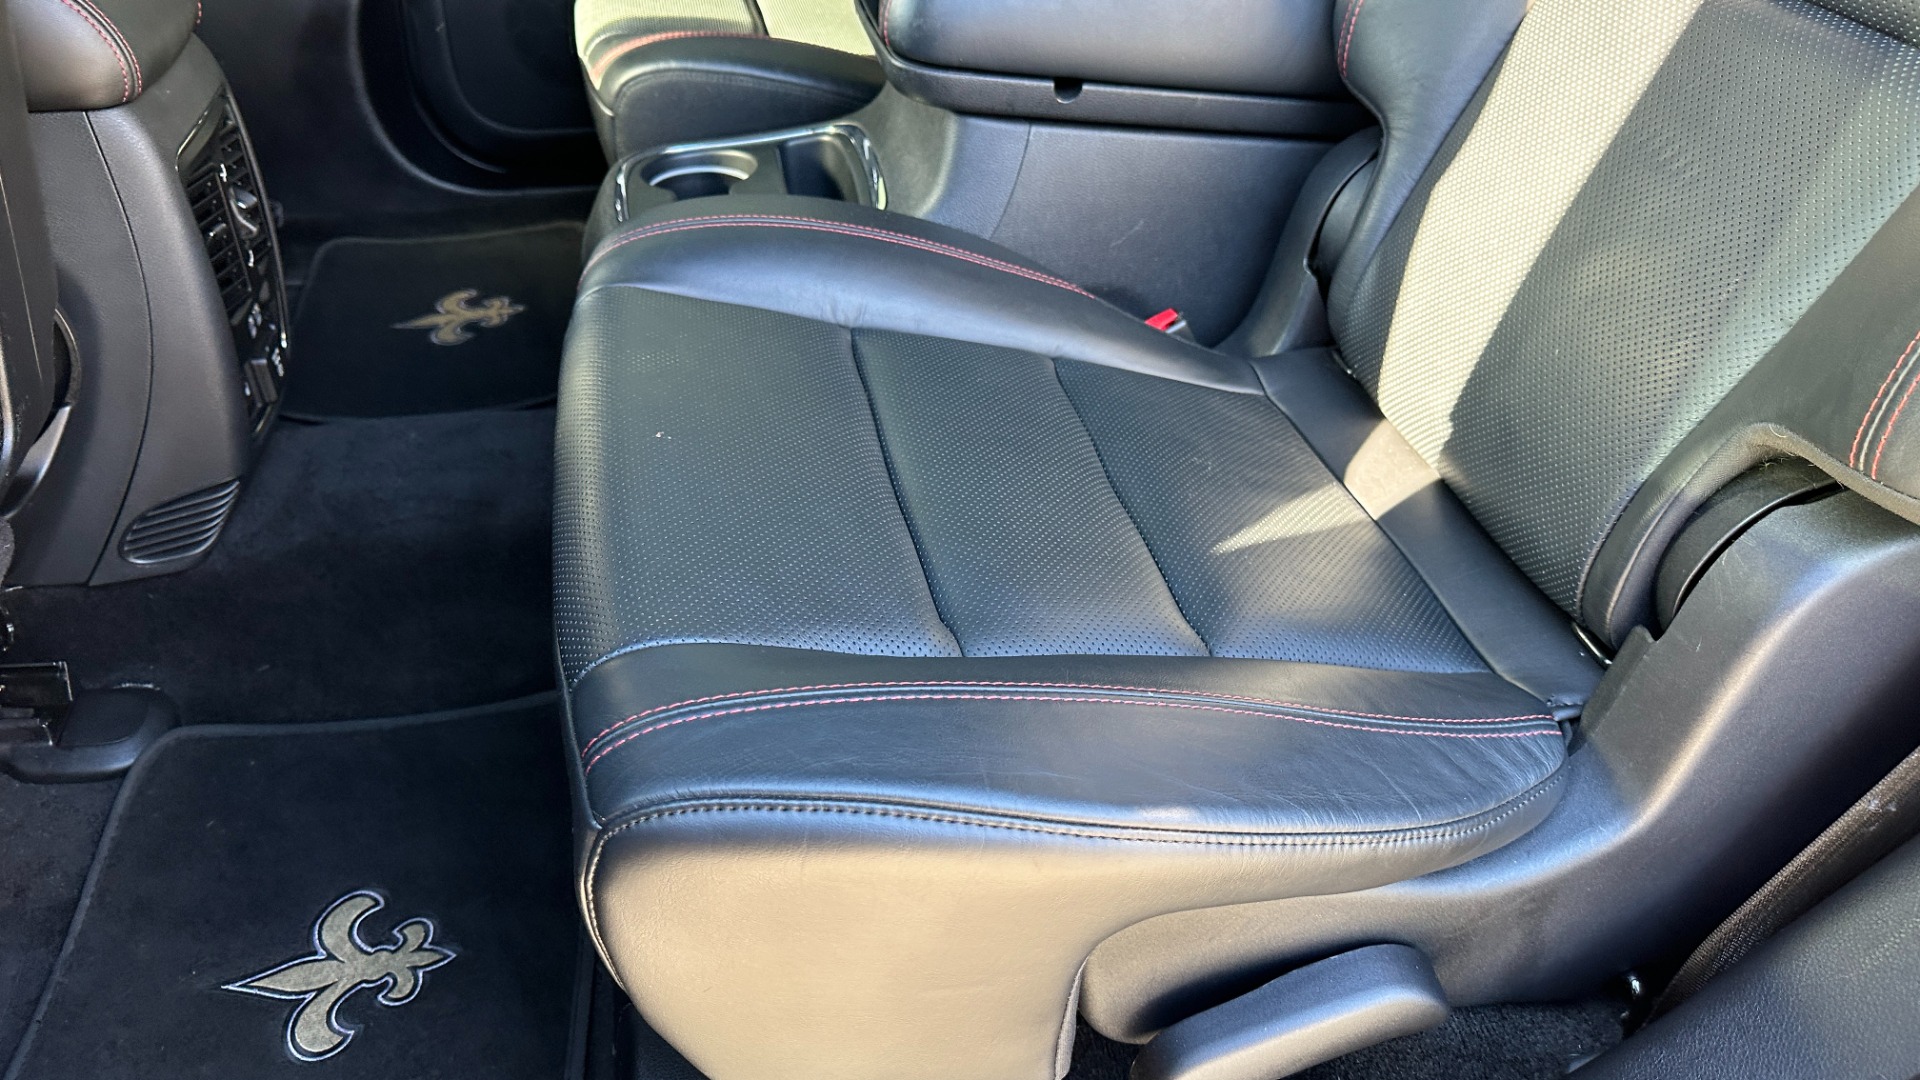 Used 2015 Dodge Durango R/T / HEMI V8 / CAPTAINS CHAIRS / 3 ROW SEATING / TECH PKG / NAPPA LEATHER  for sale Sold at Formula Imports in Charlotte NC 28227 27